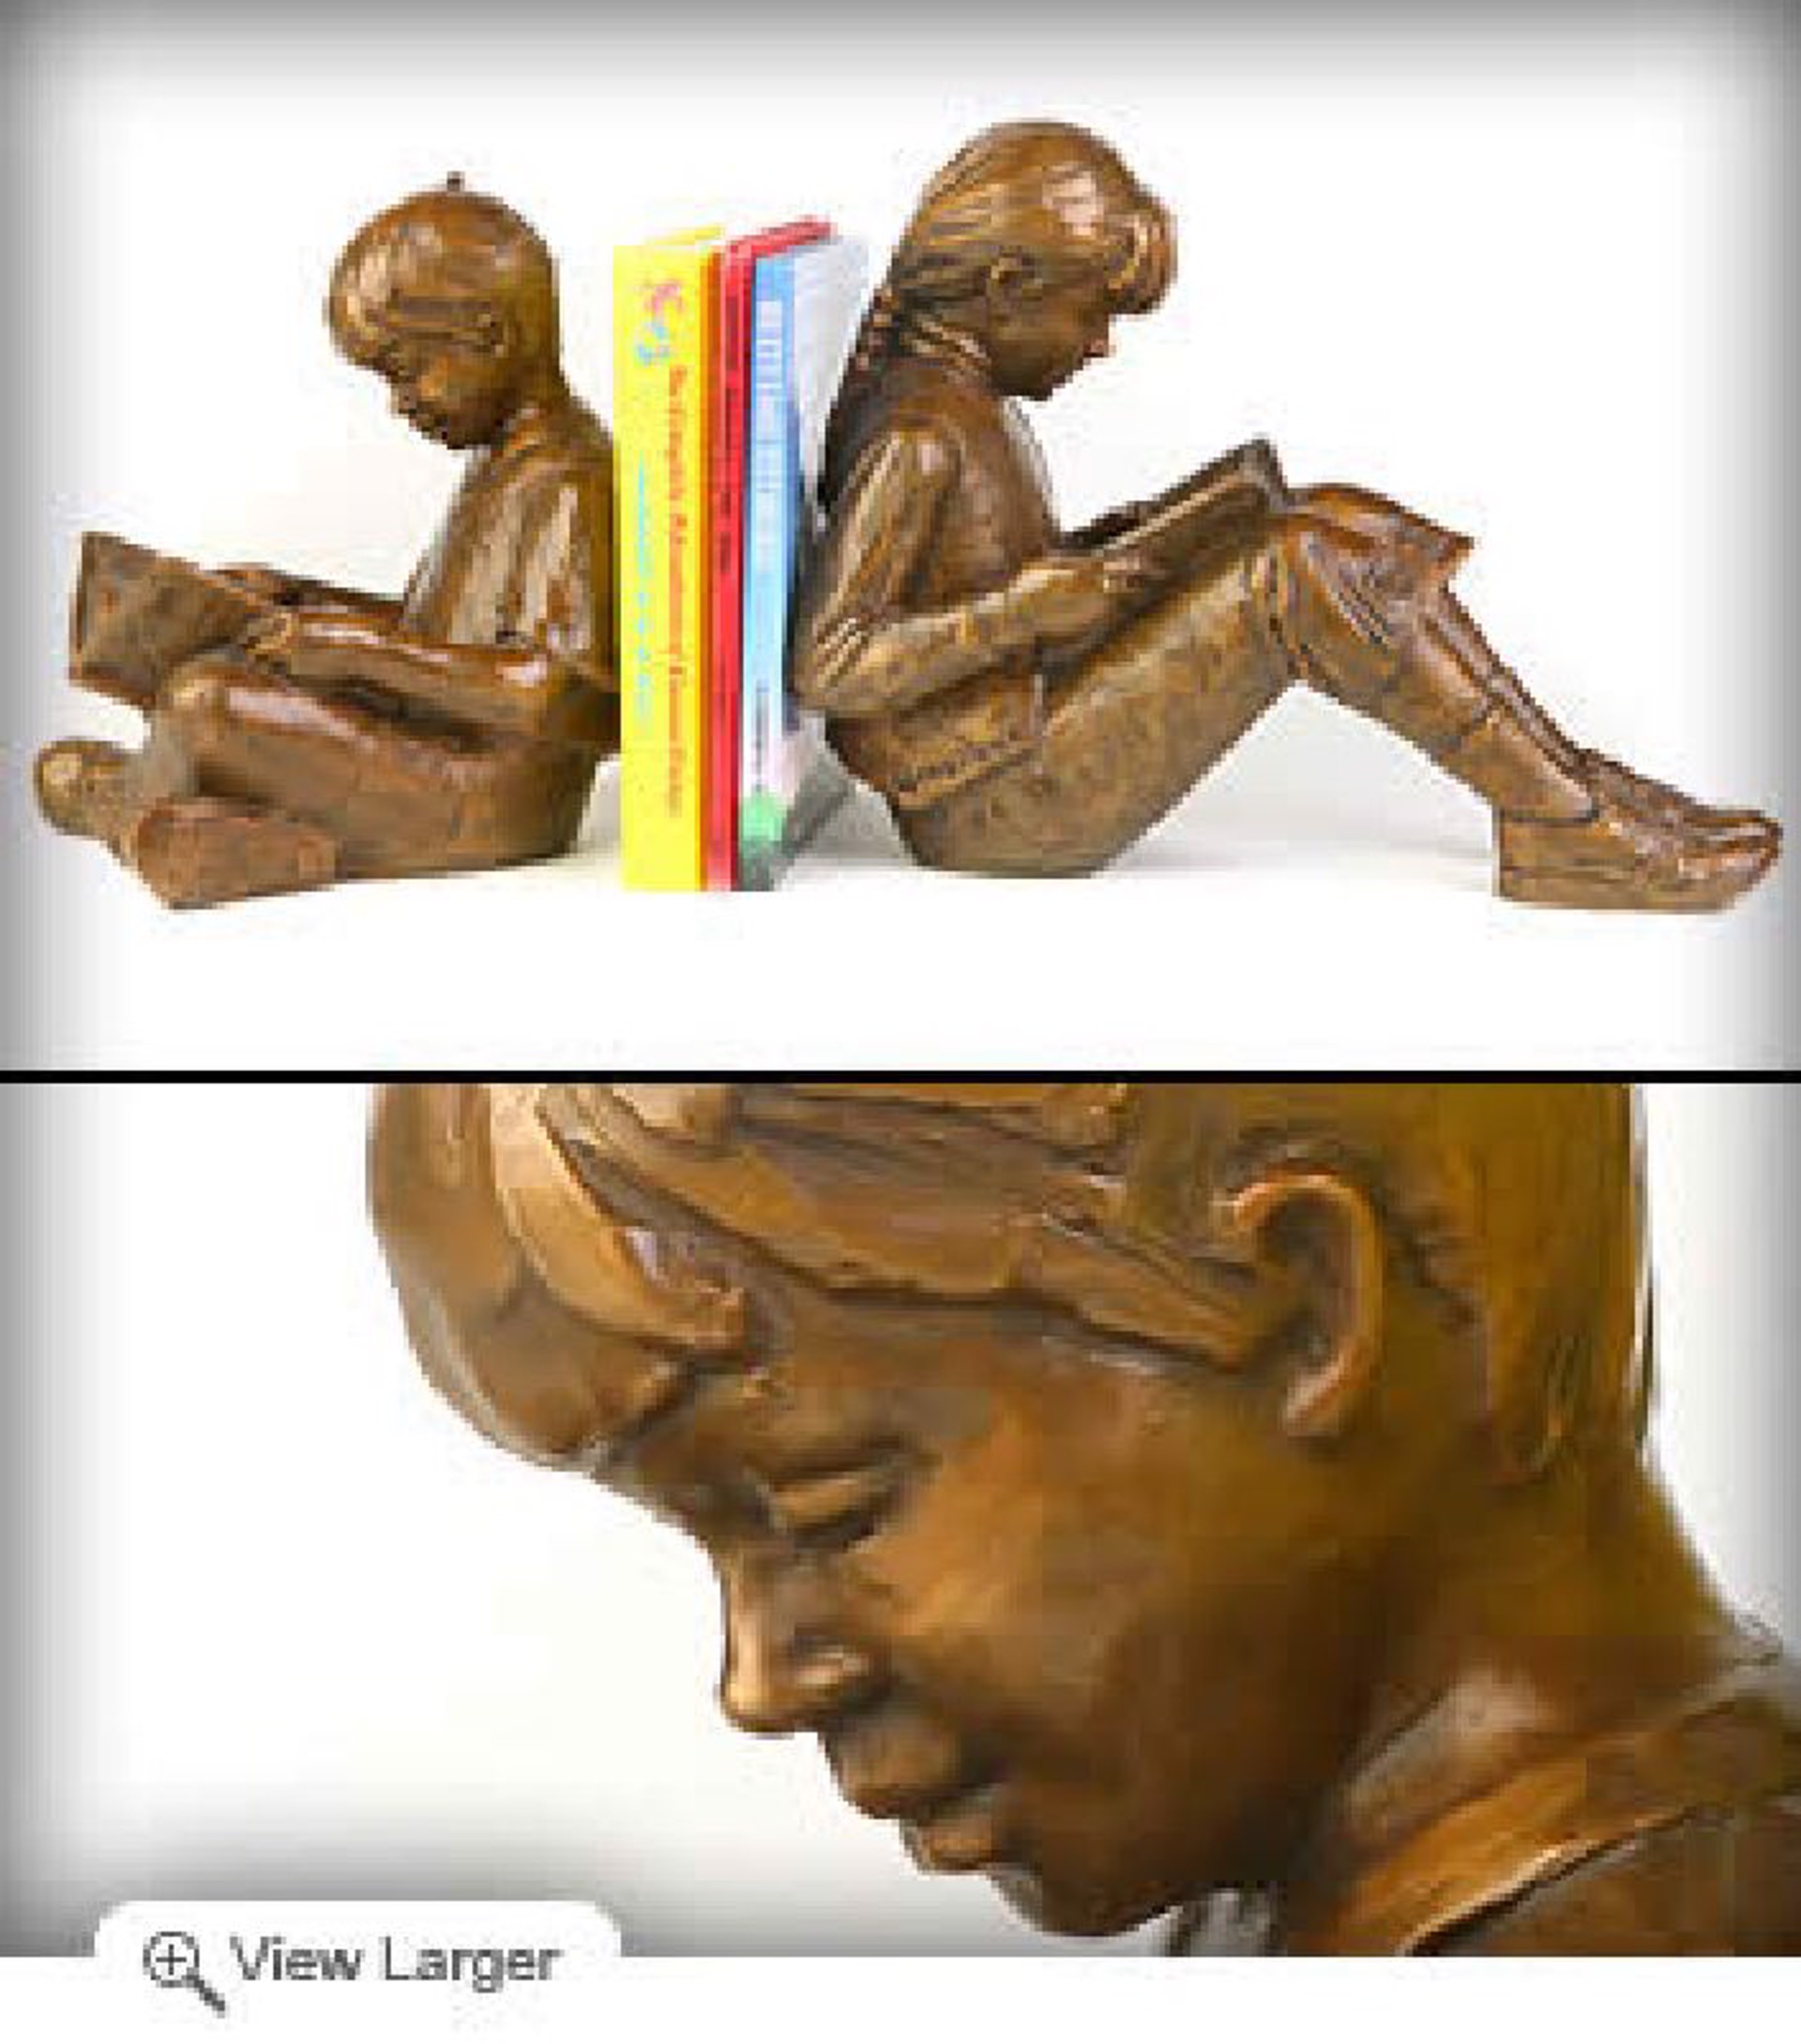 Story Time by Gary Lee Price (sculptor)